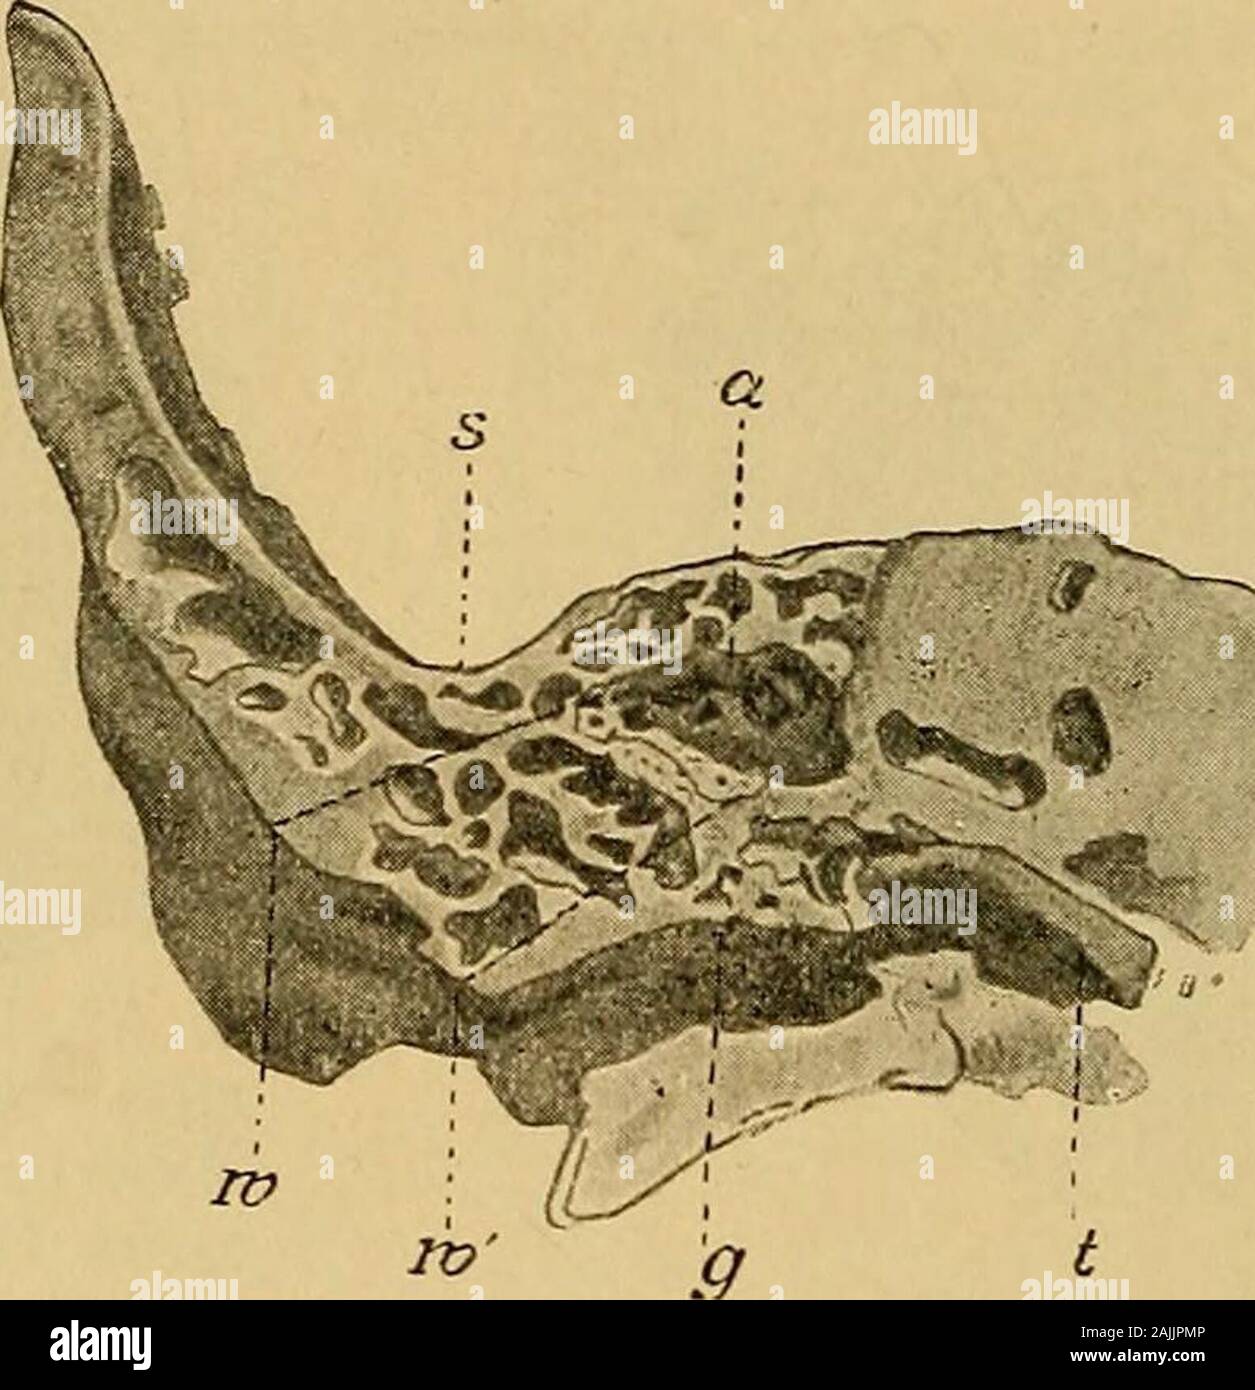 A text-book of the diseases of the ear for students and practitioners . r and a superior. The inferior is that part ofthe mastoid lying on the internal side of its conical portion, and 48 DISEASES OF THE EAR is grooved, in a sagittal direction, by the incisura mastoidea; thisis of variable depth, and serves for the insertion of the digastricmuscle. The osseous wall is frequently as thin as paper at thisplace, and, therefore, abscesses can find a ready outlet in thisdirection (Bezold). The superior is traversed by the windingcourse of the lateral sinus, which originates at the torcularHerophili Stock Photo